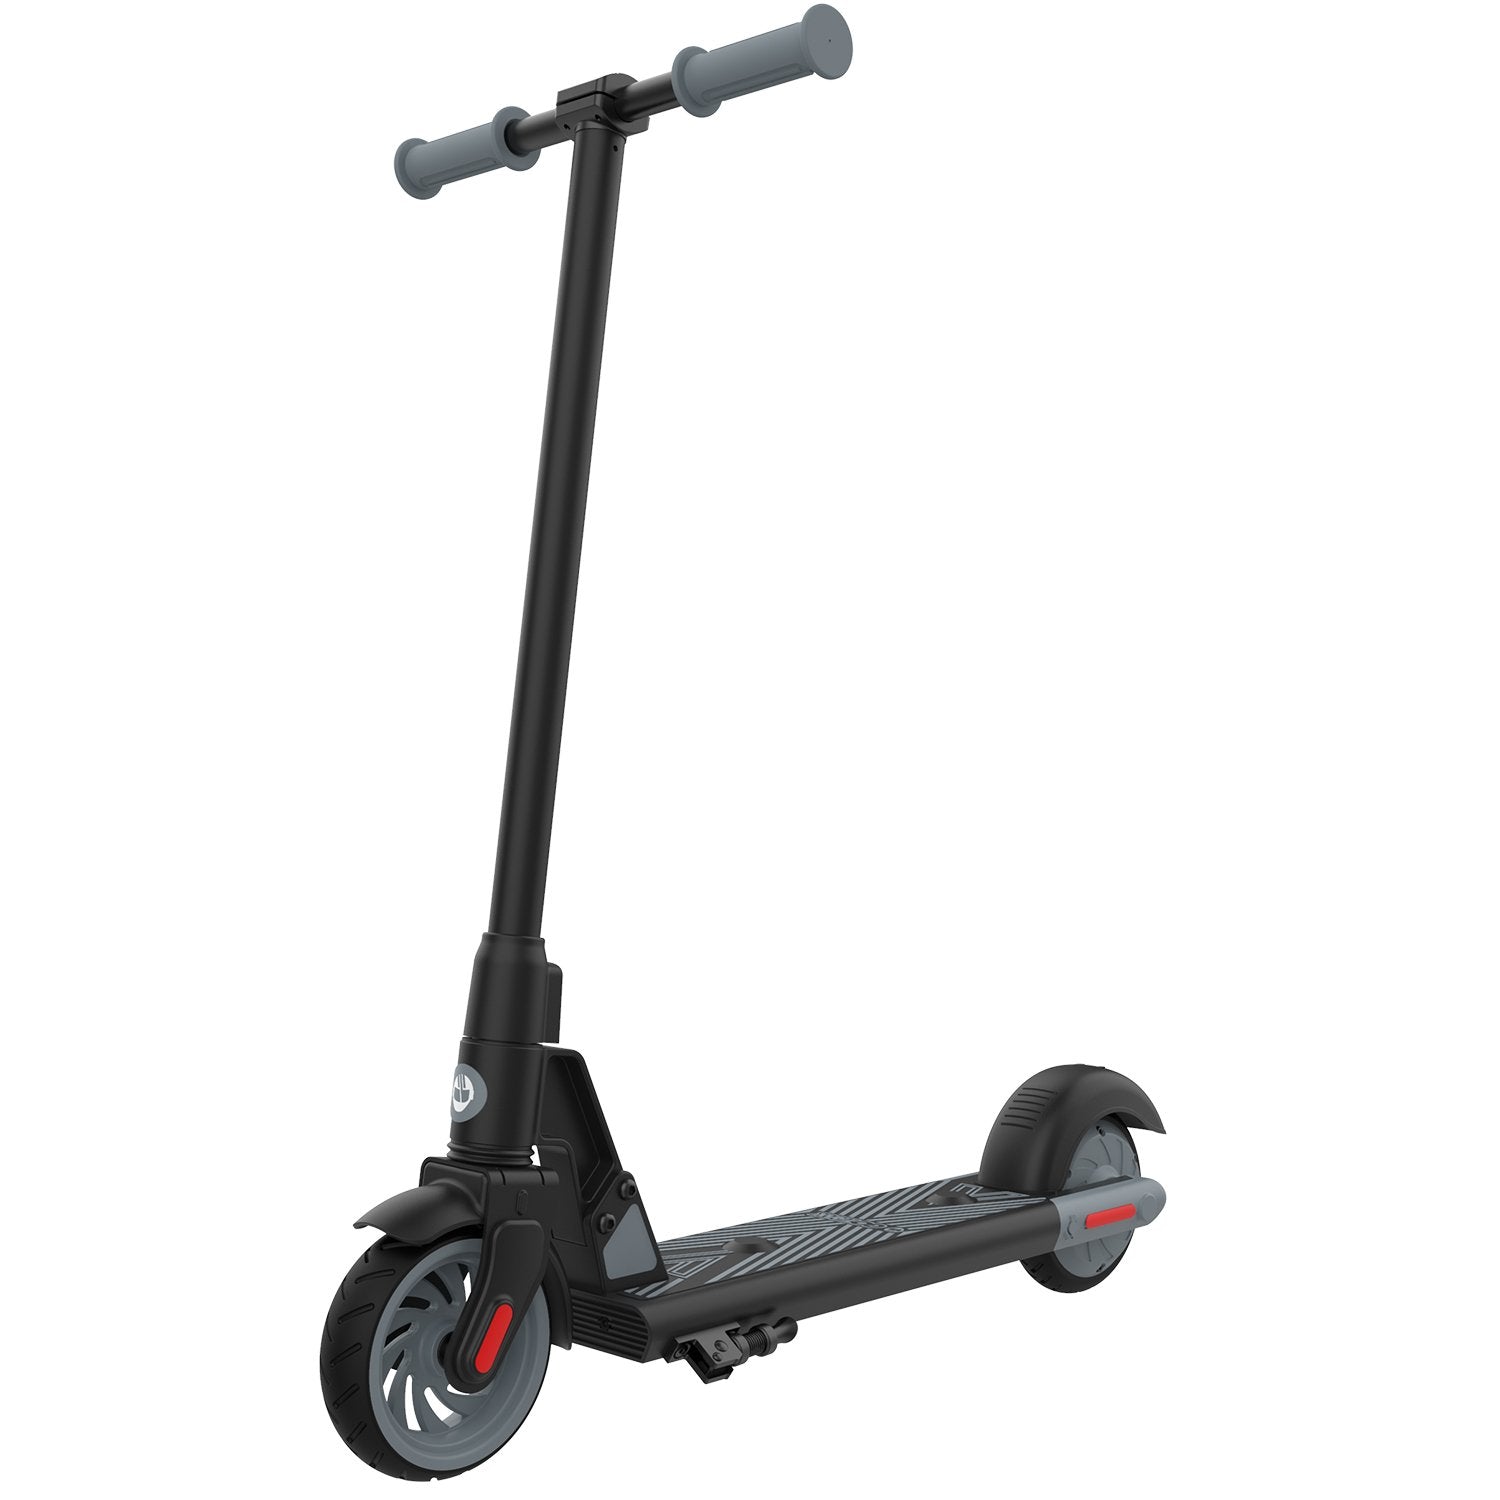 Black gks electric scooter for kids main image